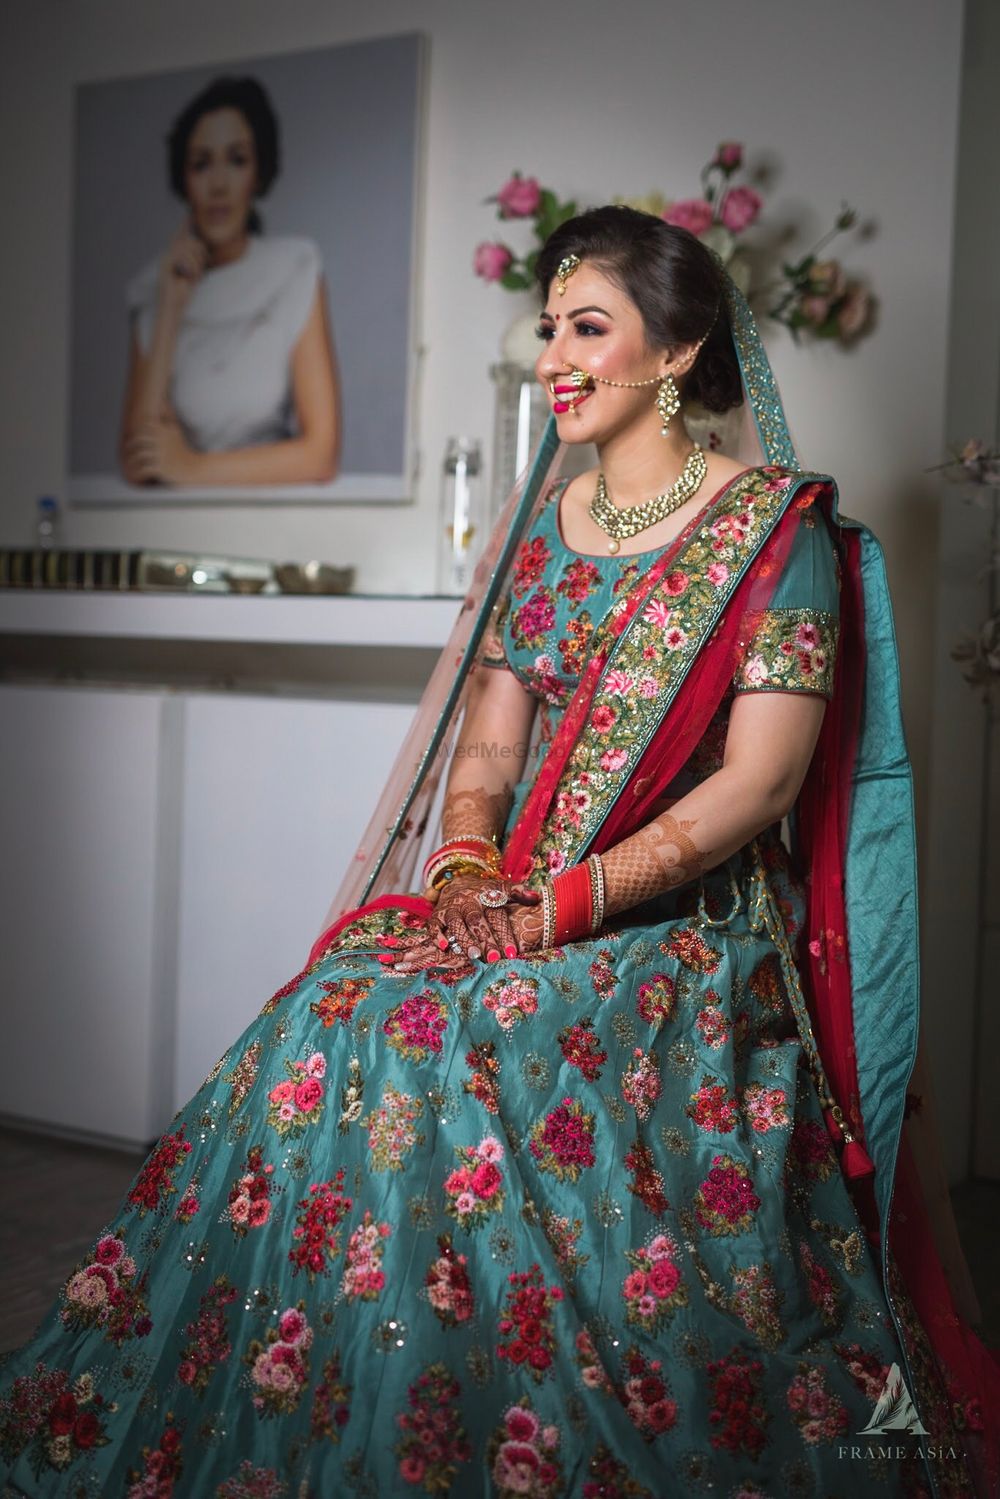 Photo of Bridal lehenga in red and teal with floral embroidery